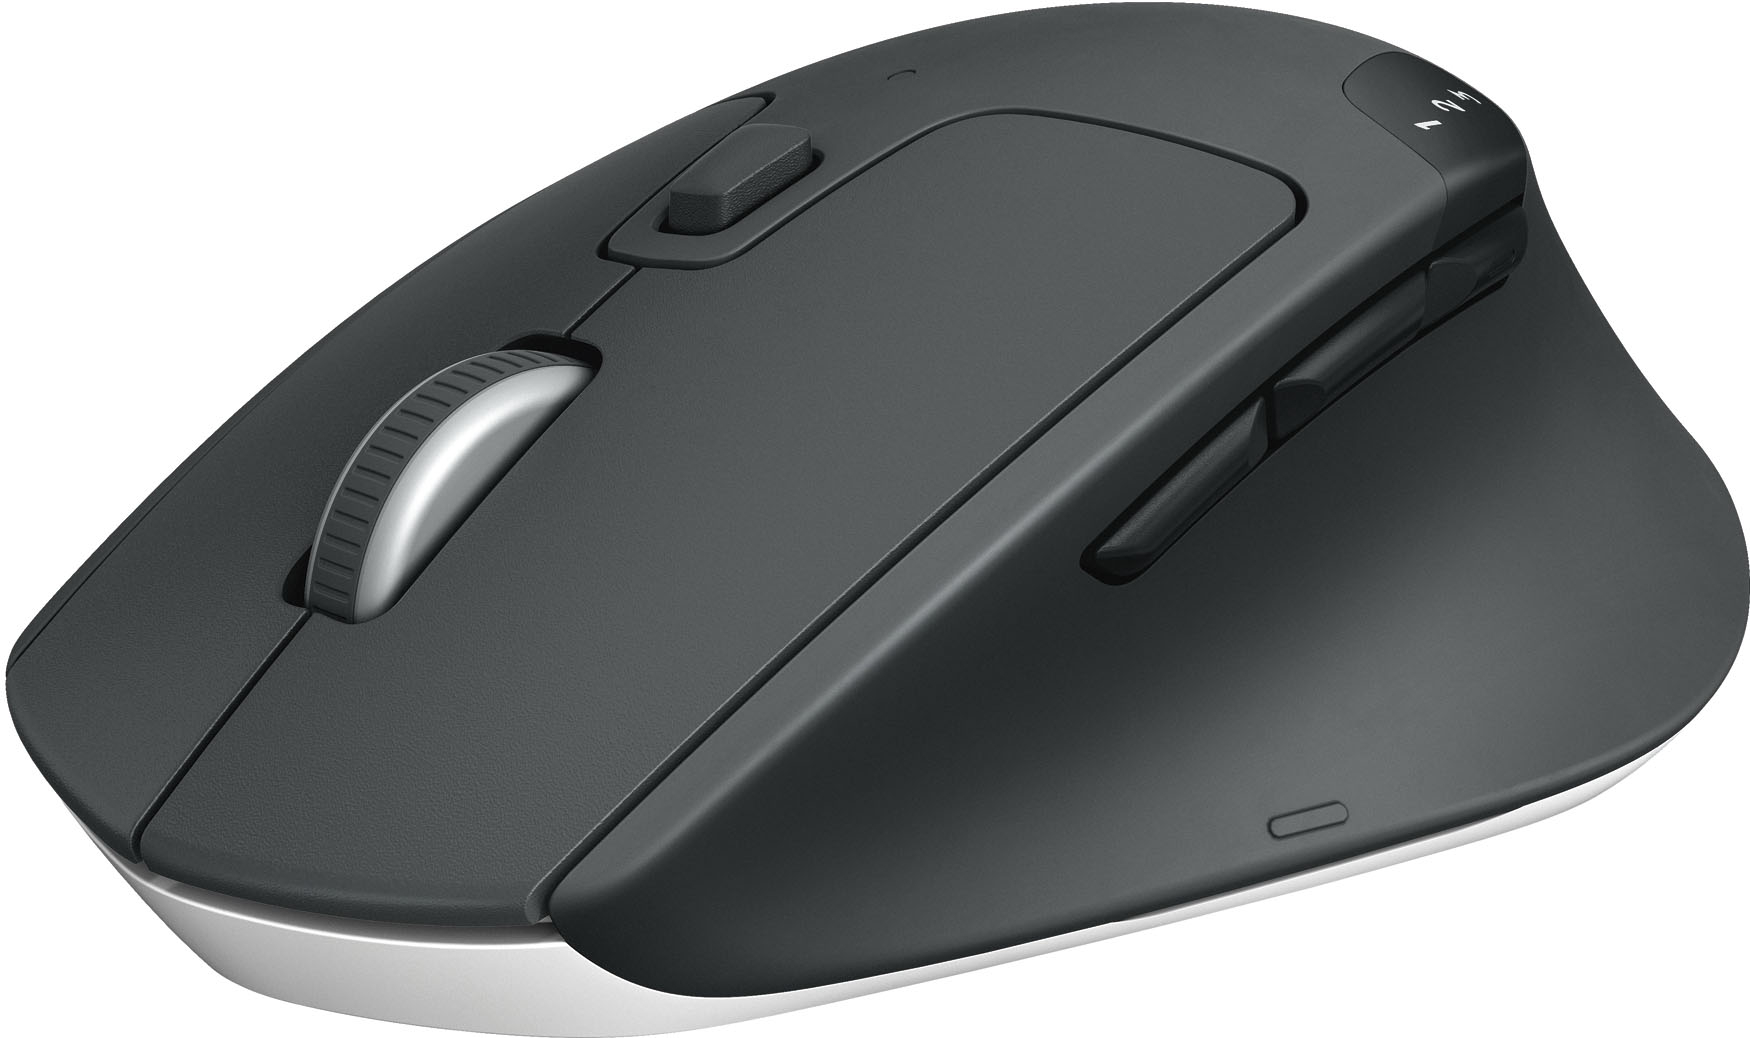 910-004790 Wireless Mouse 720 Internet Store 